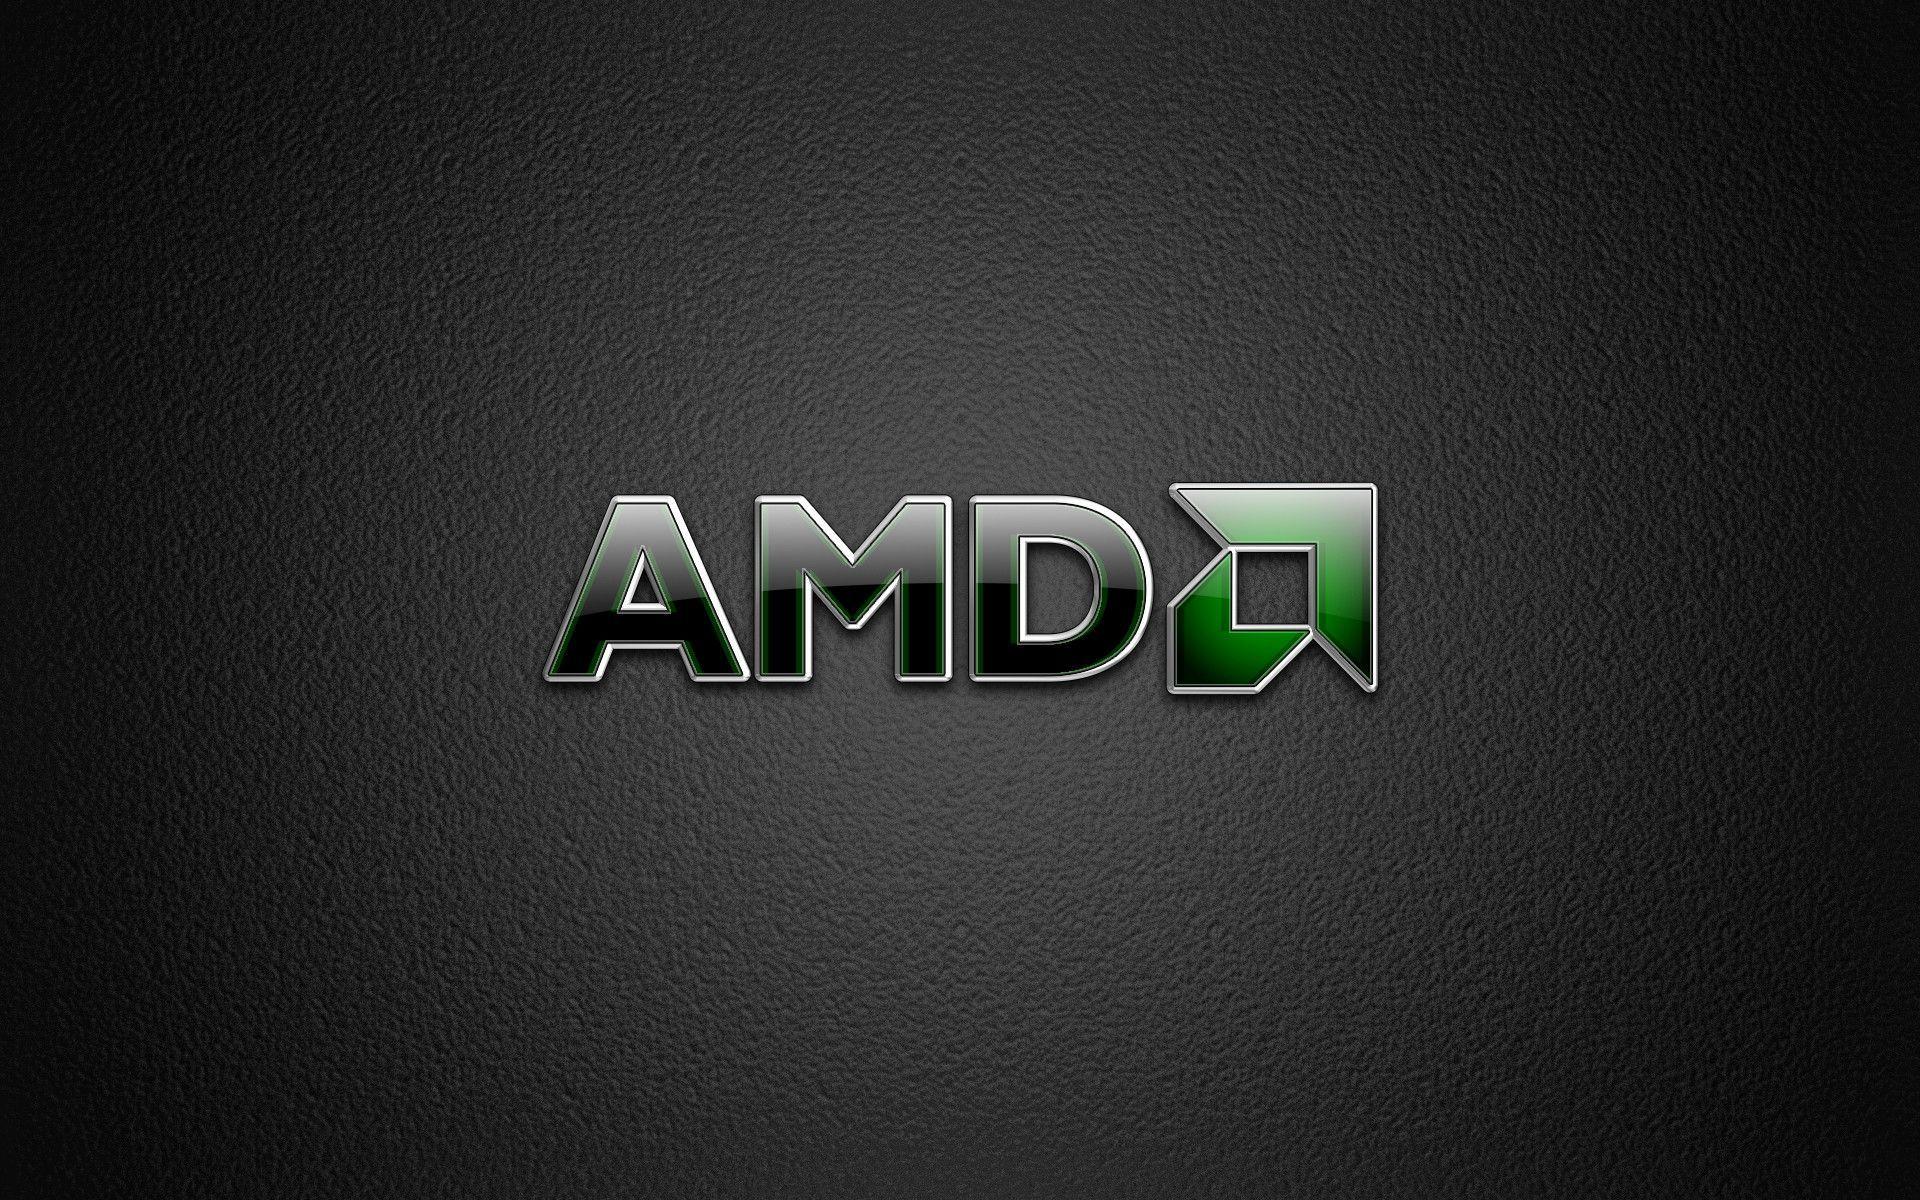 Awesome AMD Wallpaper For Android Wallpaper. Wallpaper